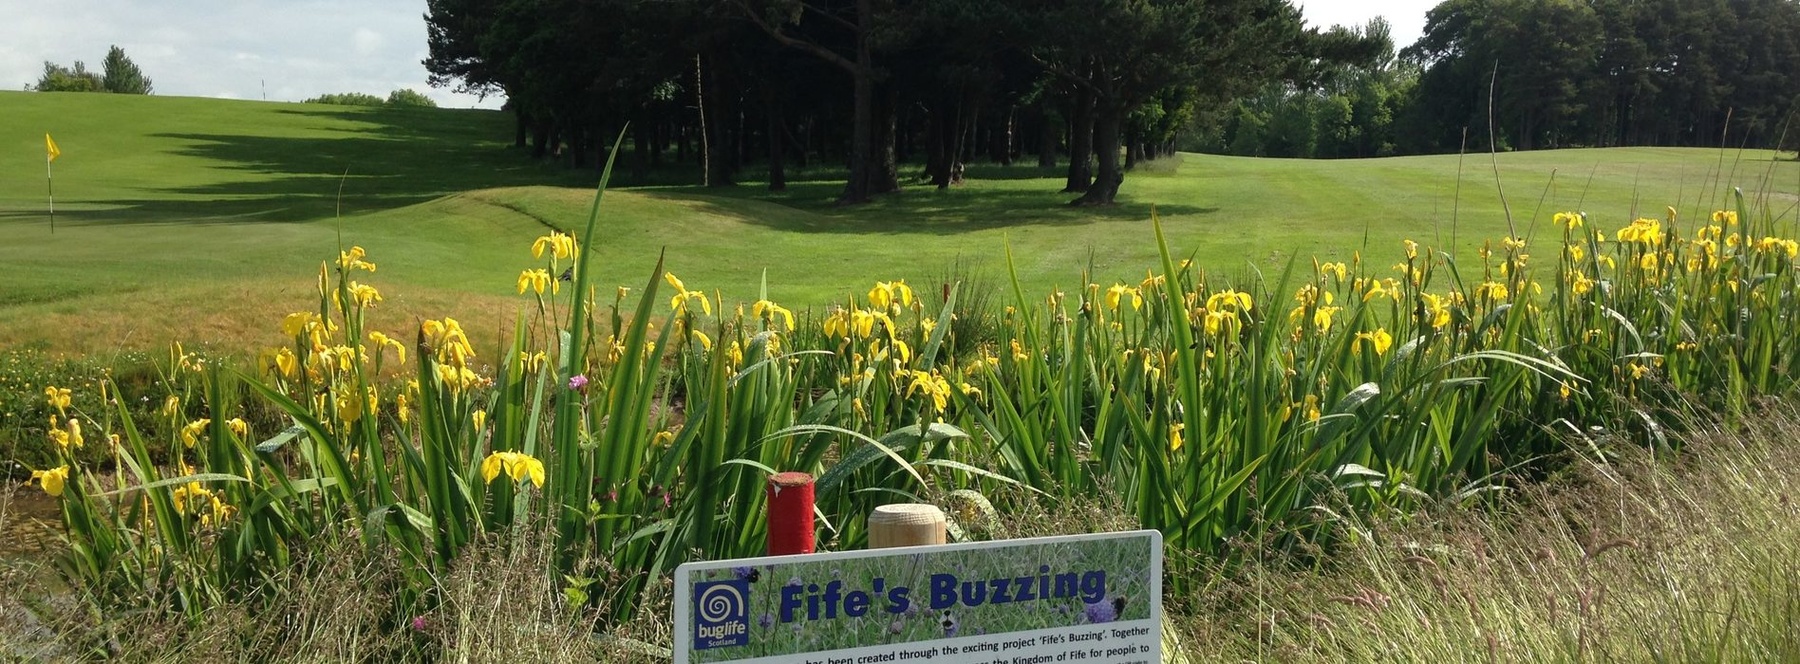 Fife Golf Trust Fife’s Buzzing project to encourage pollinators and enhance biodiversity